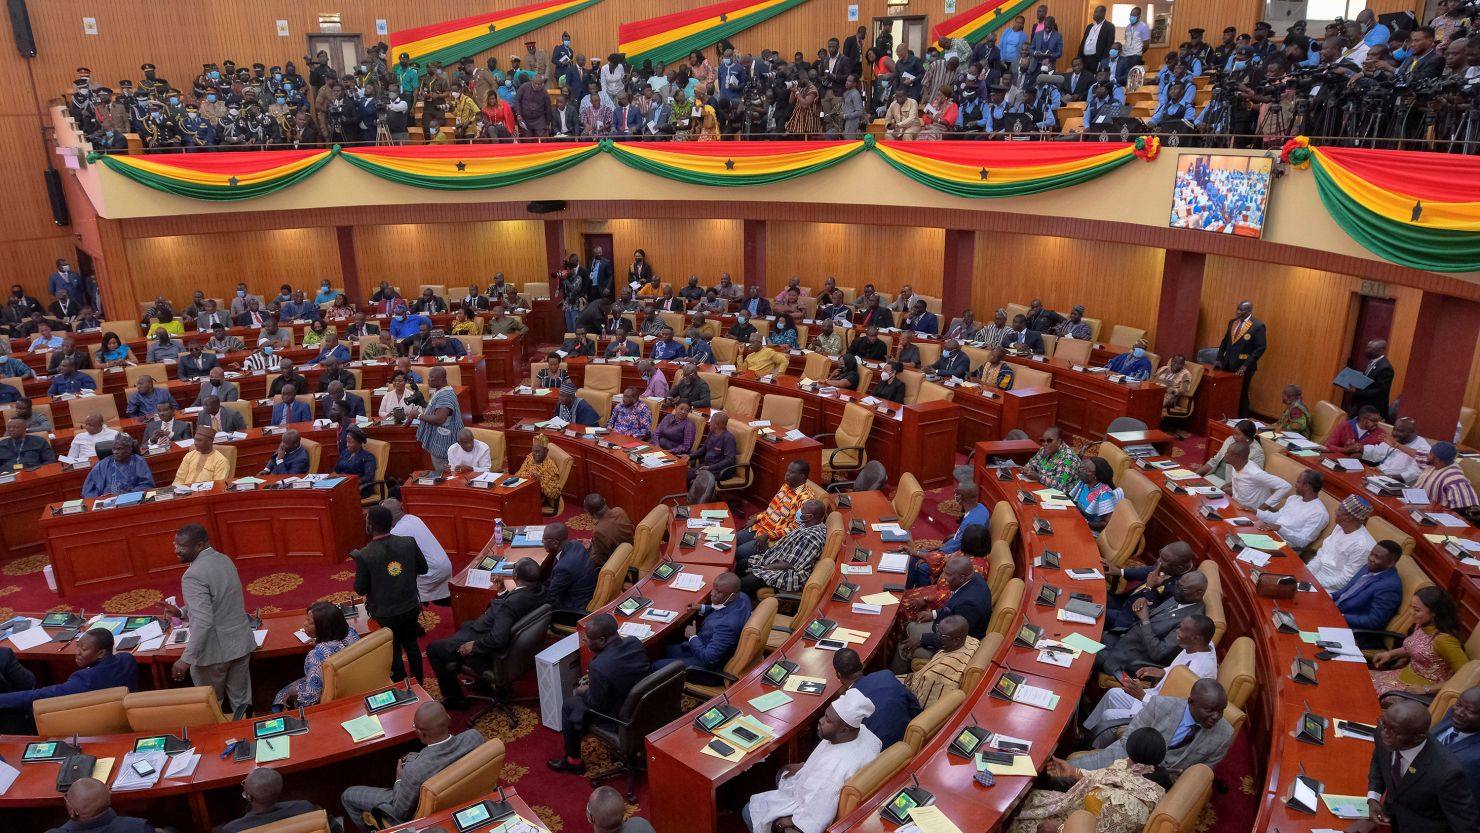 Parliamentarians and members of the public listen as Ghanaian President Nana Akufo-Addo delivers his annual state of the nation address on March 30, 2022.